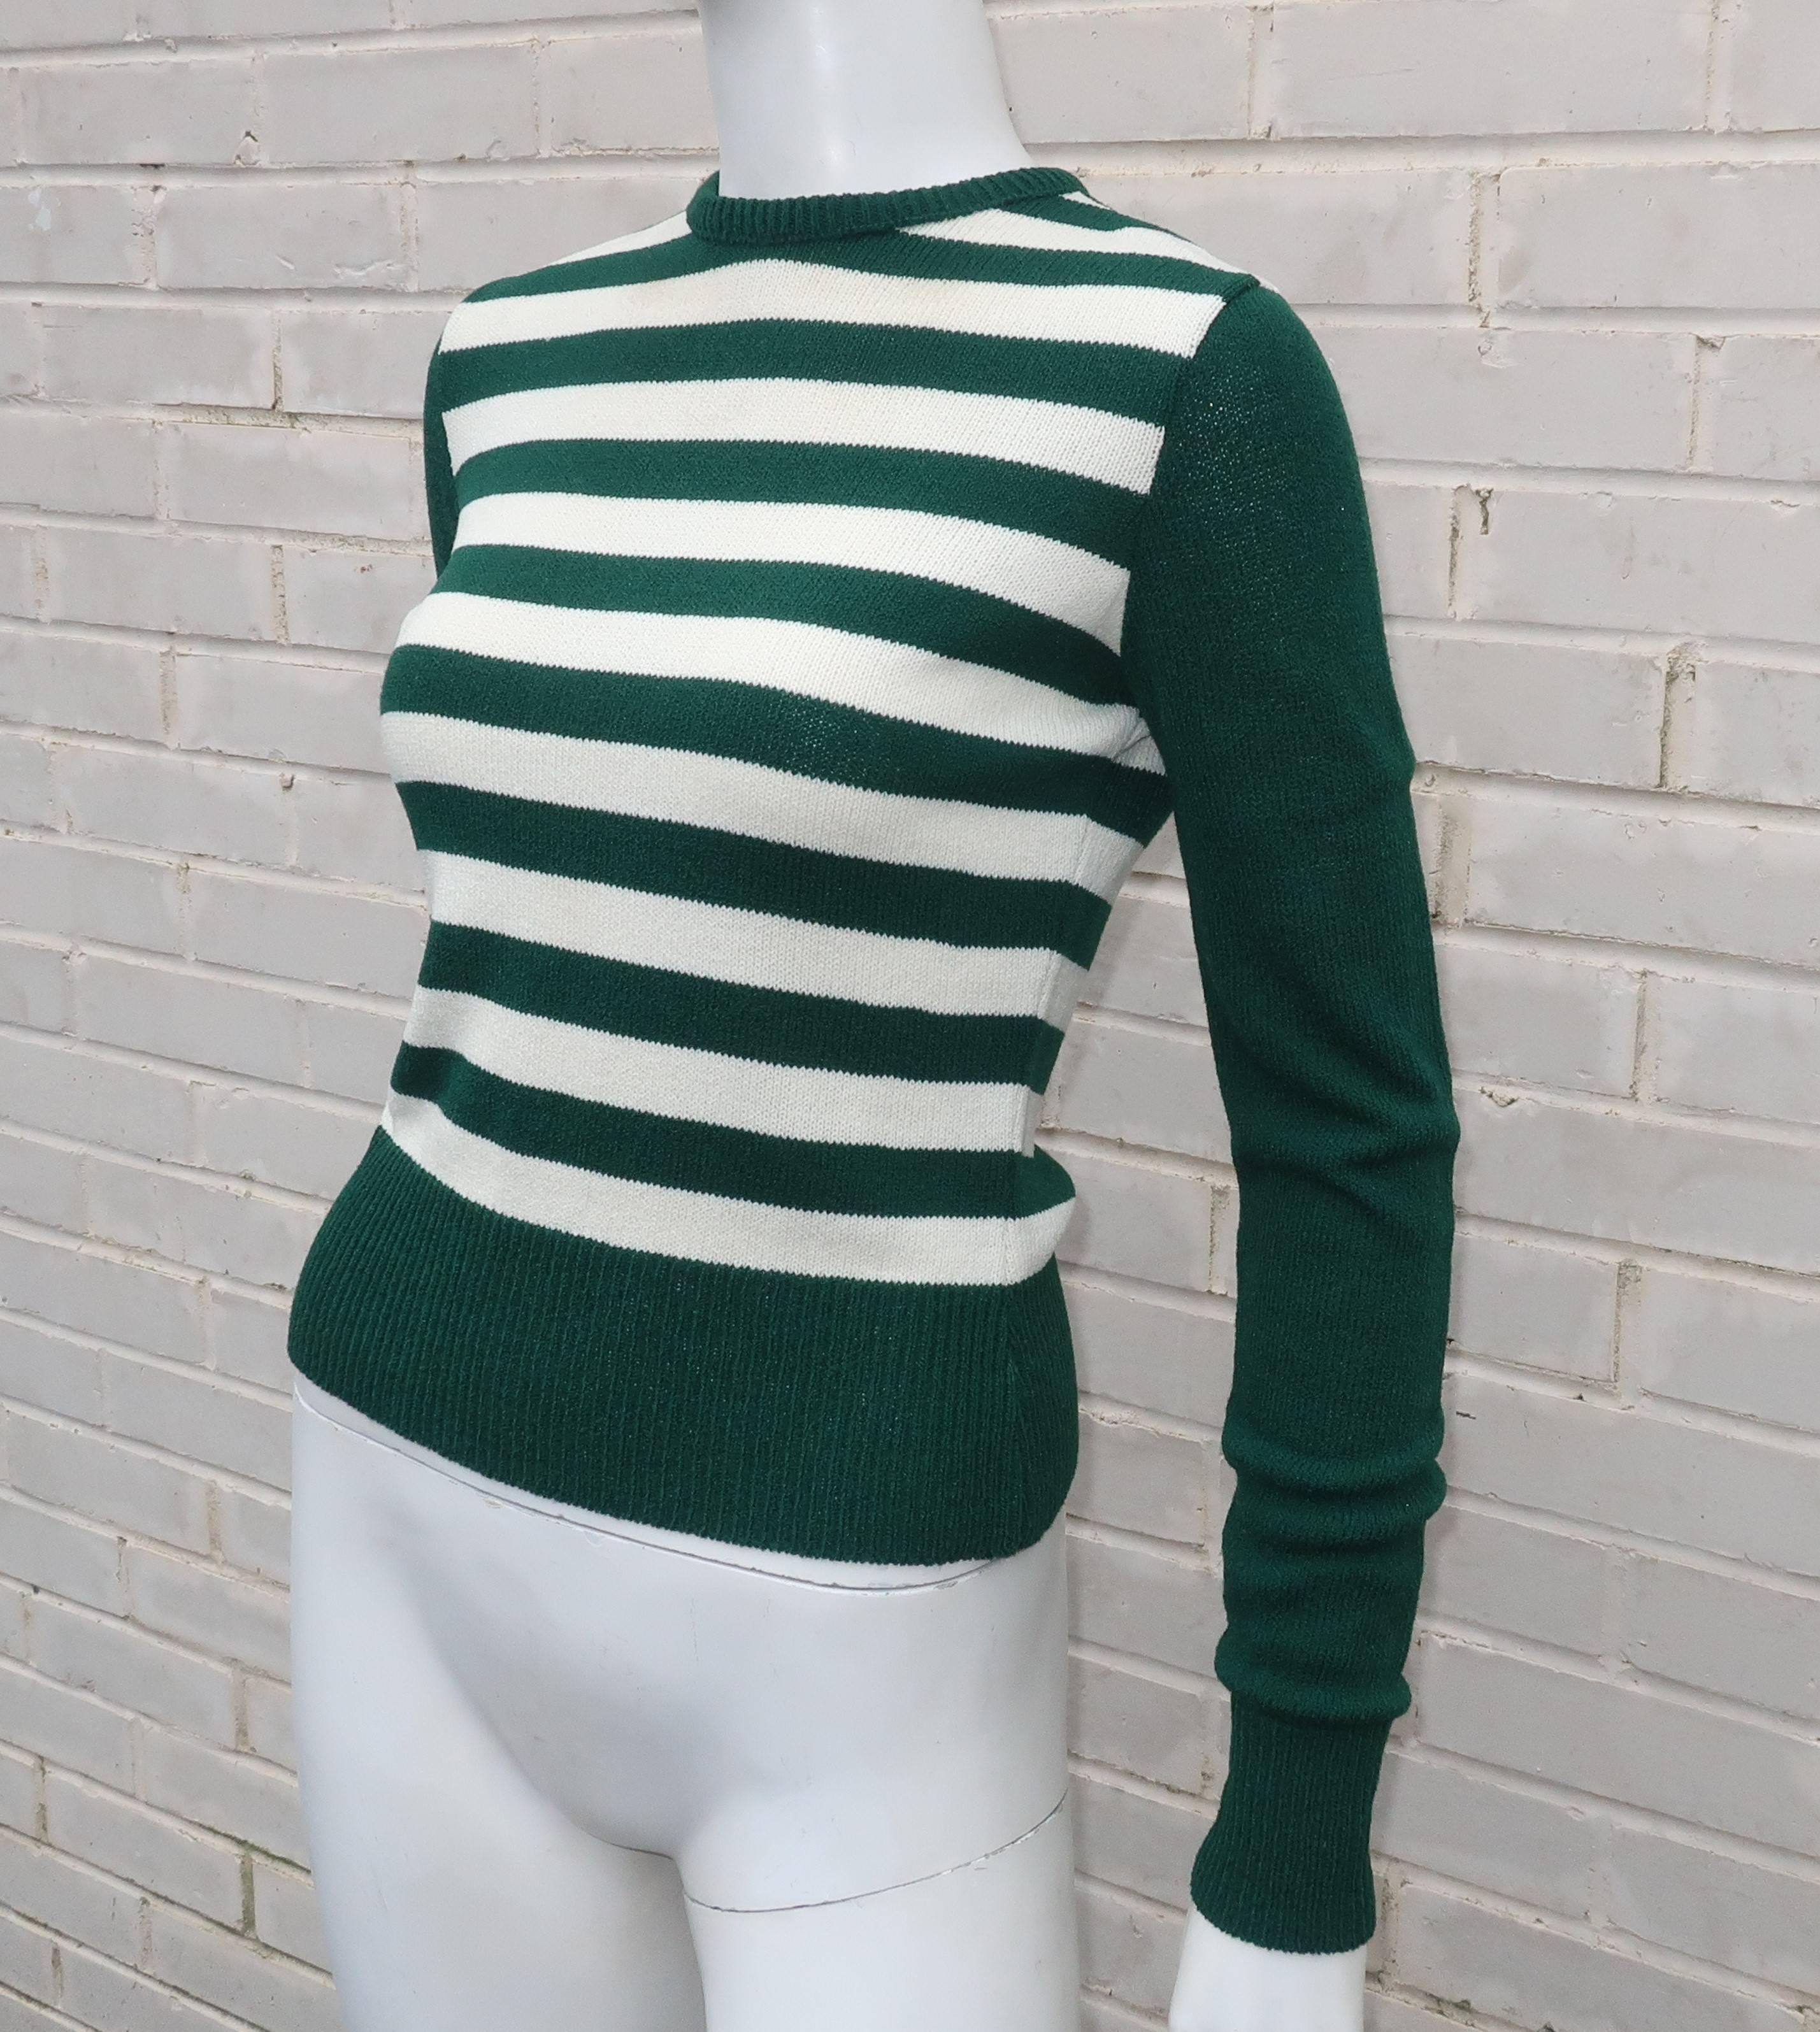 1970's Saks Fifth Avenue Green & White Striped Knit Sweater Set 1